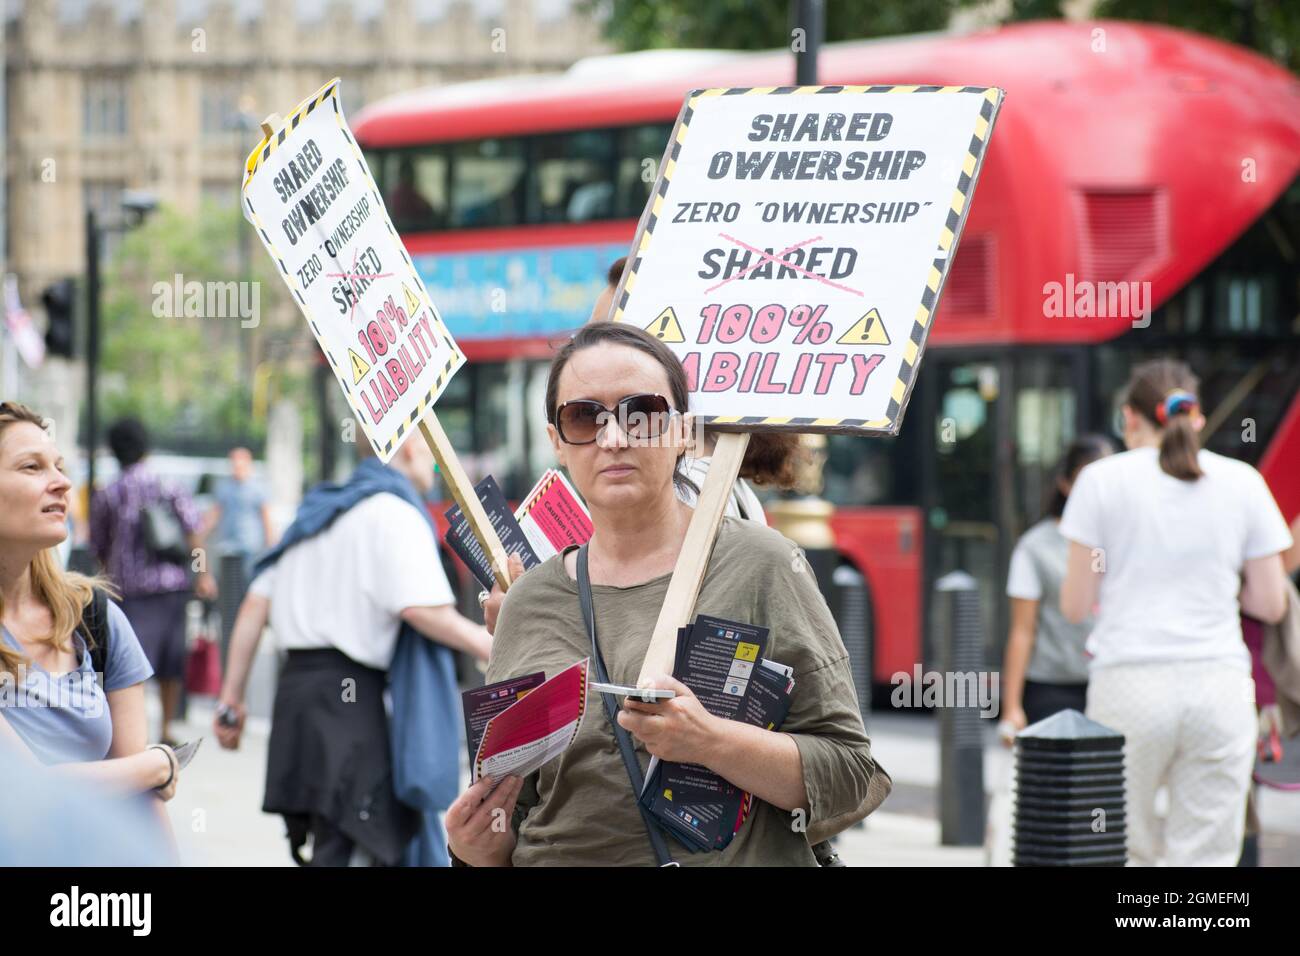 London, UK. 18th Sep, 2021. Rent council is a wiser choice dont buy Shared Ownership or Leaseholder is a hung, you become a slave to your property you dont owns demonstration at Queen Elizabeth II Conference Centre on  2021-09-18, London, UK. Credit: Picture Capital/Alamy Live News Stock Photo